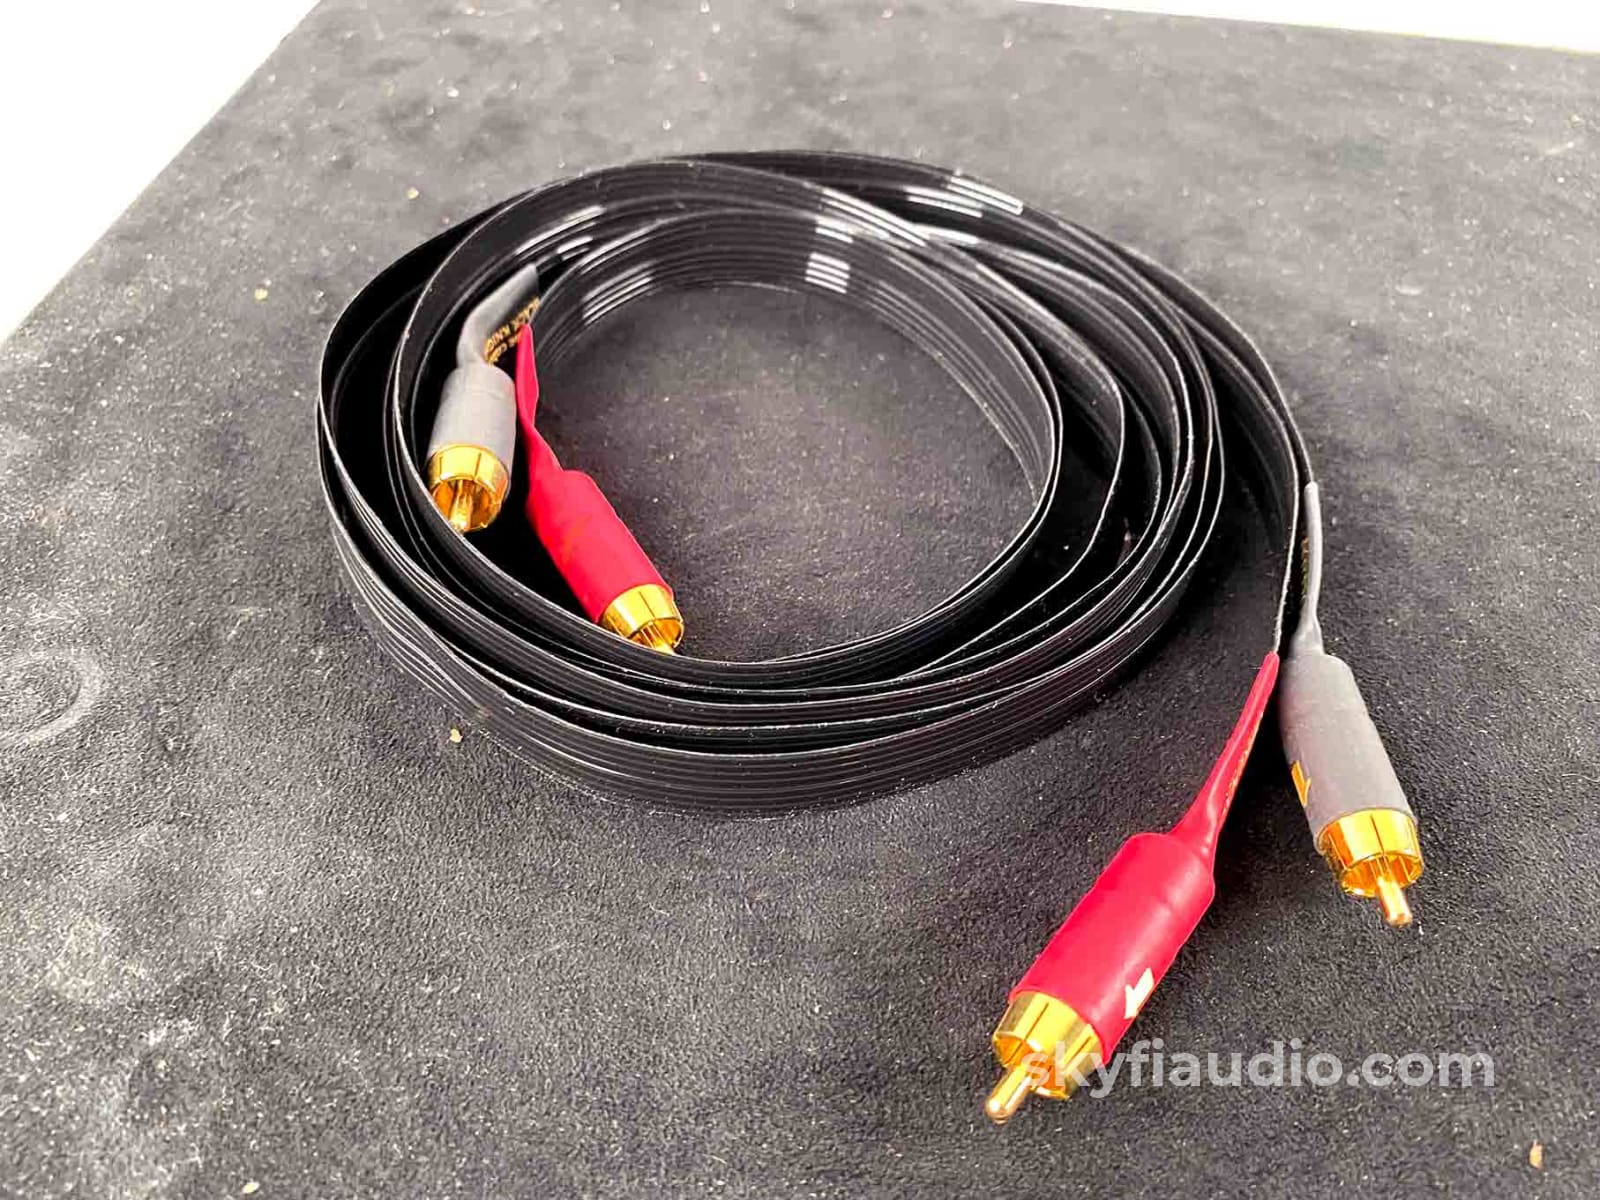 Nordost Black Night Rca Interconnects (Pair) - 2M Cables